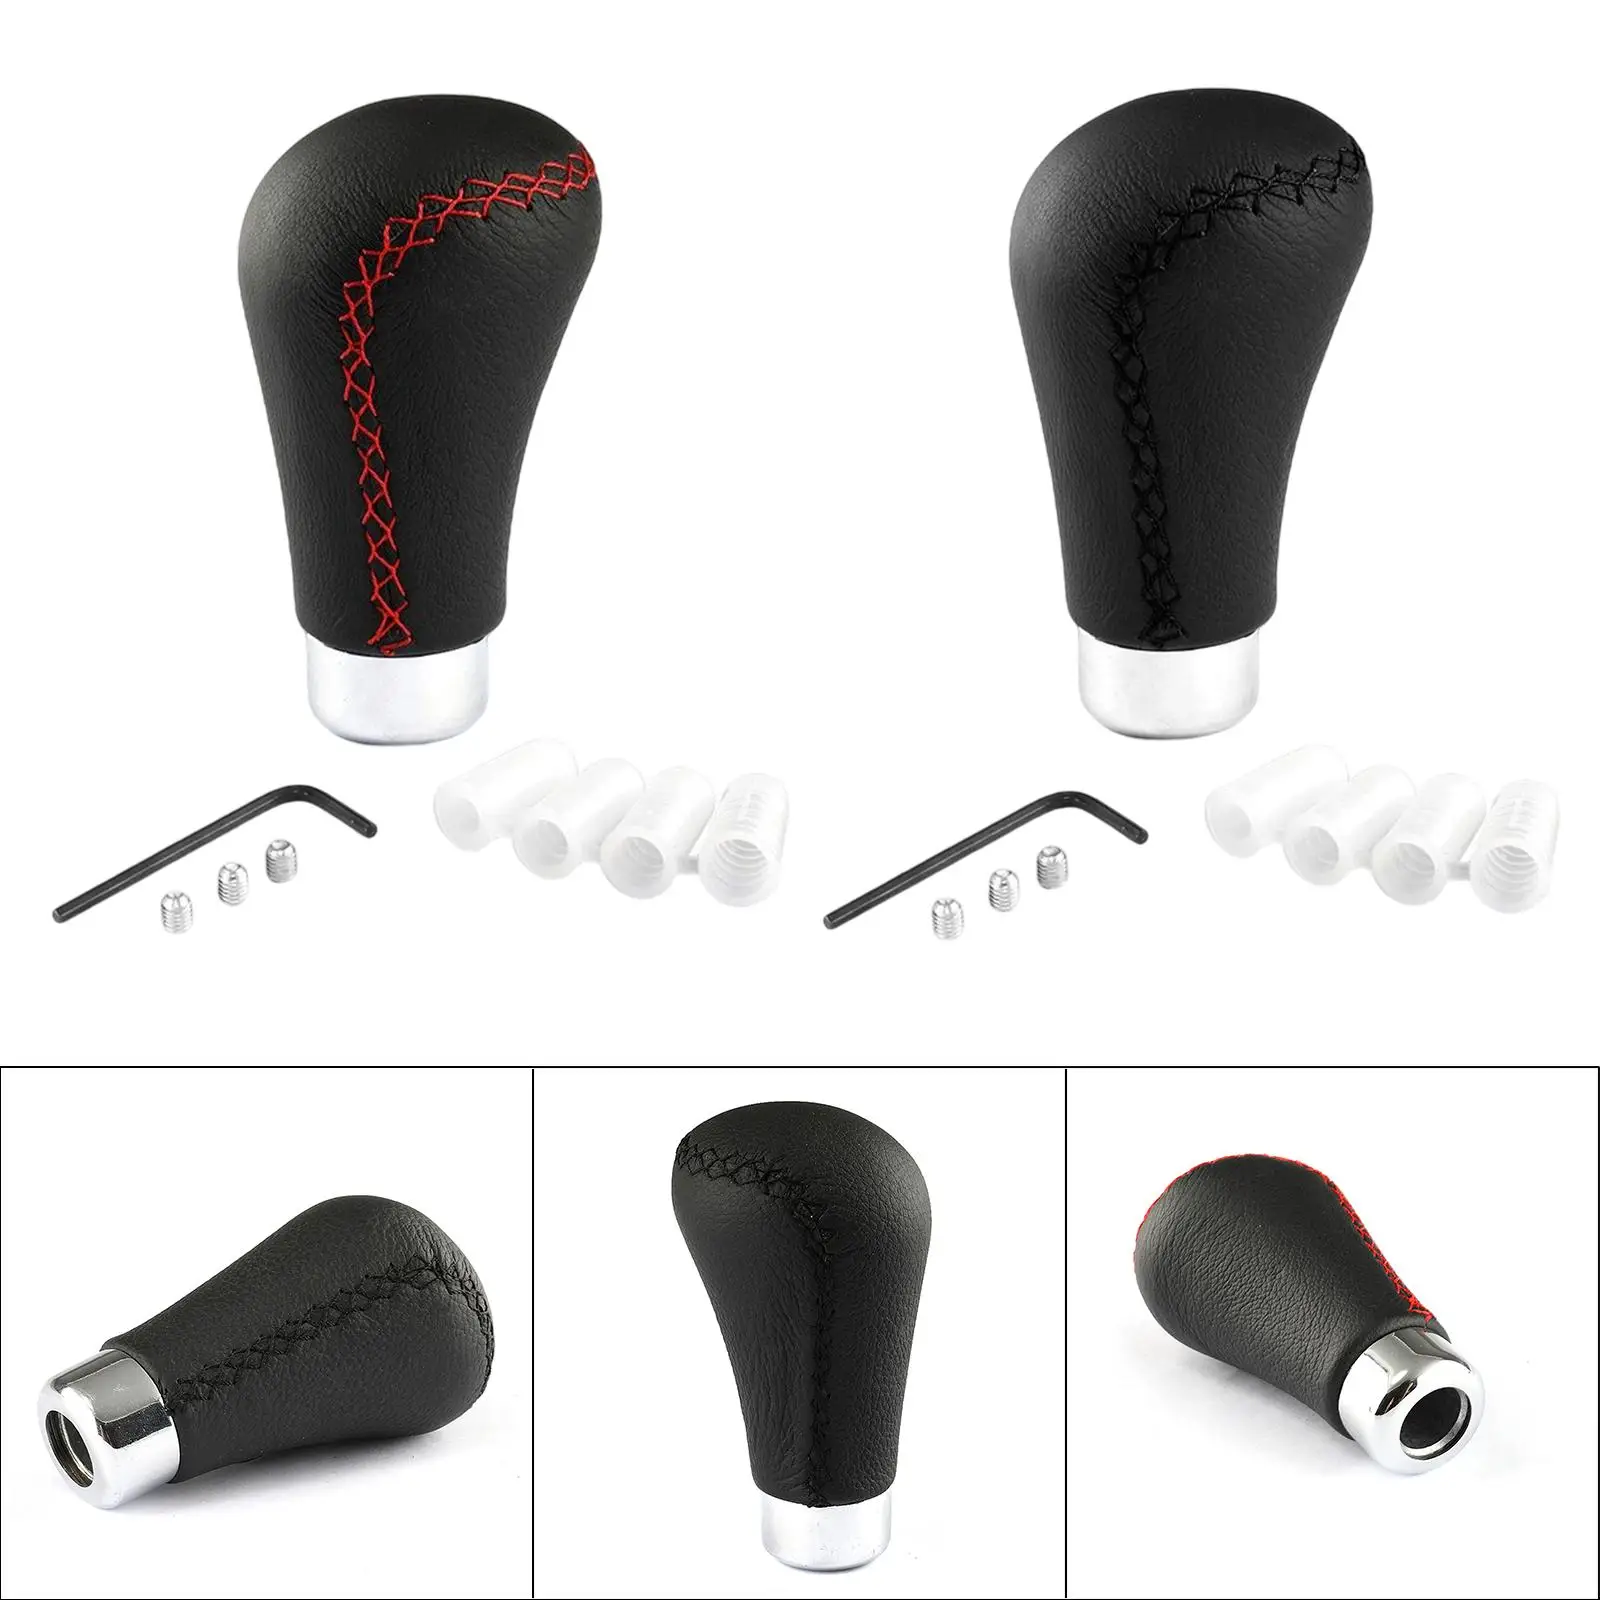 Universal Gear Shift Knob Car Modified Accessory PU Leather Manual Gear Shifter Stick for Auto Transmission Car